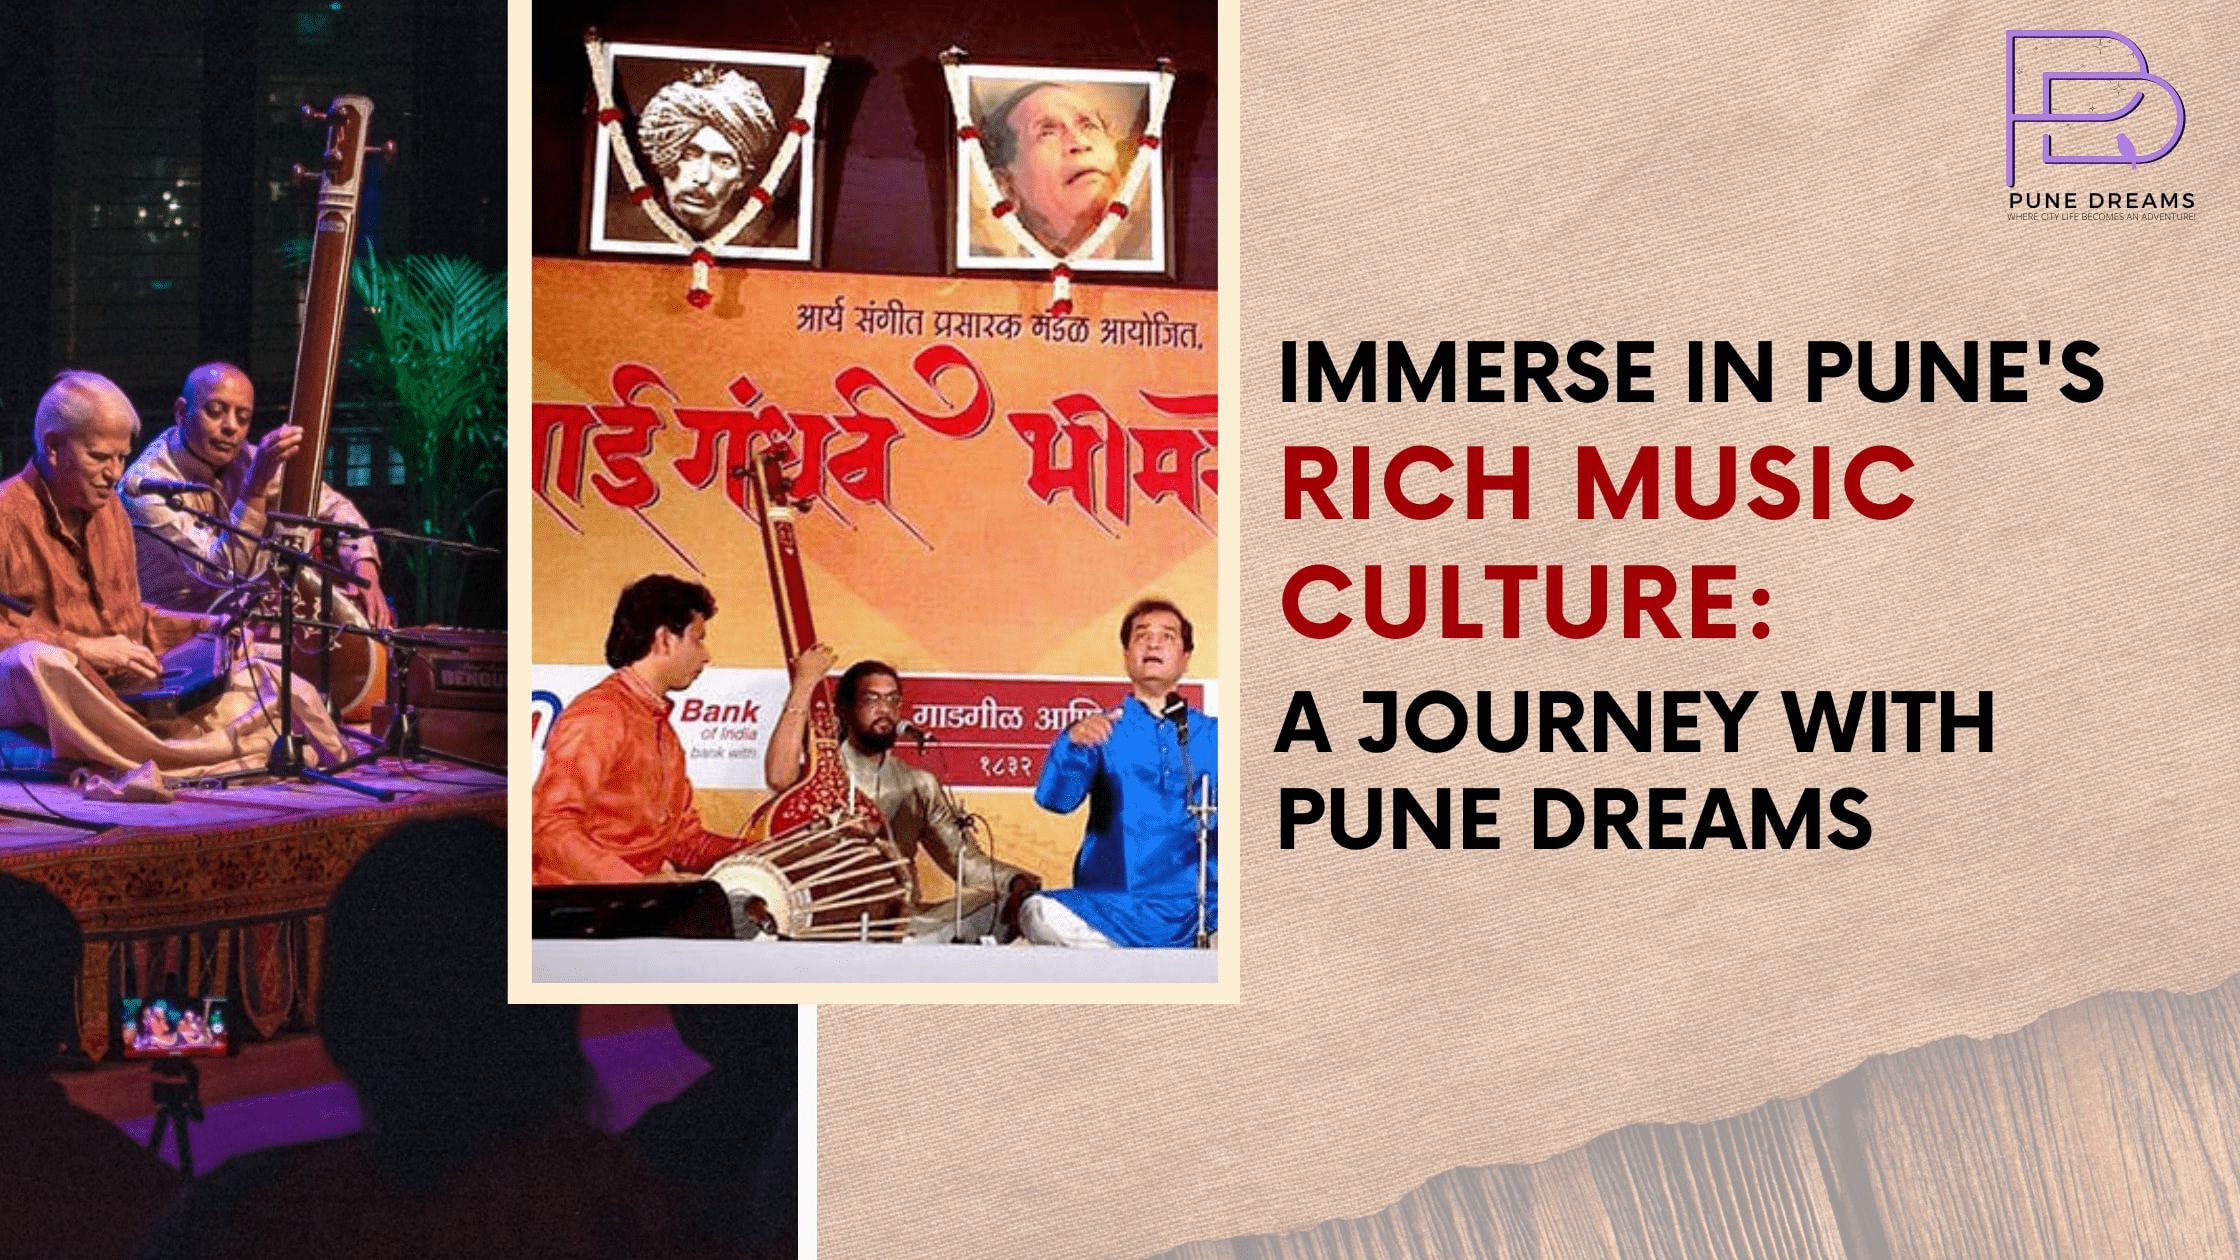 Immerse in Pune’s Rich Music Culture: A Journey with Pune Dreams